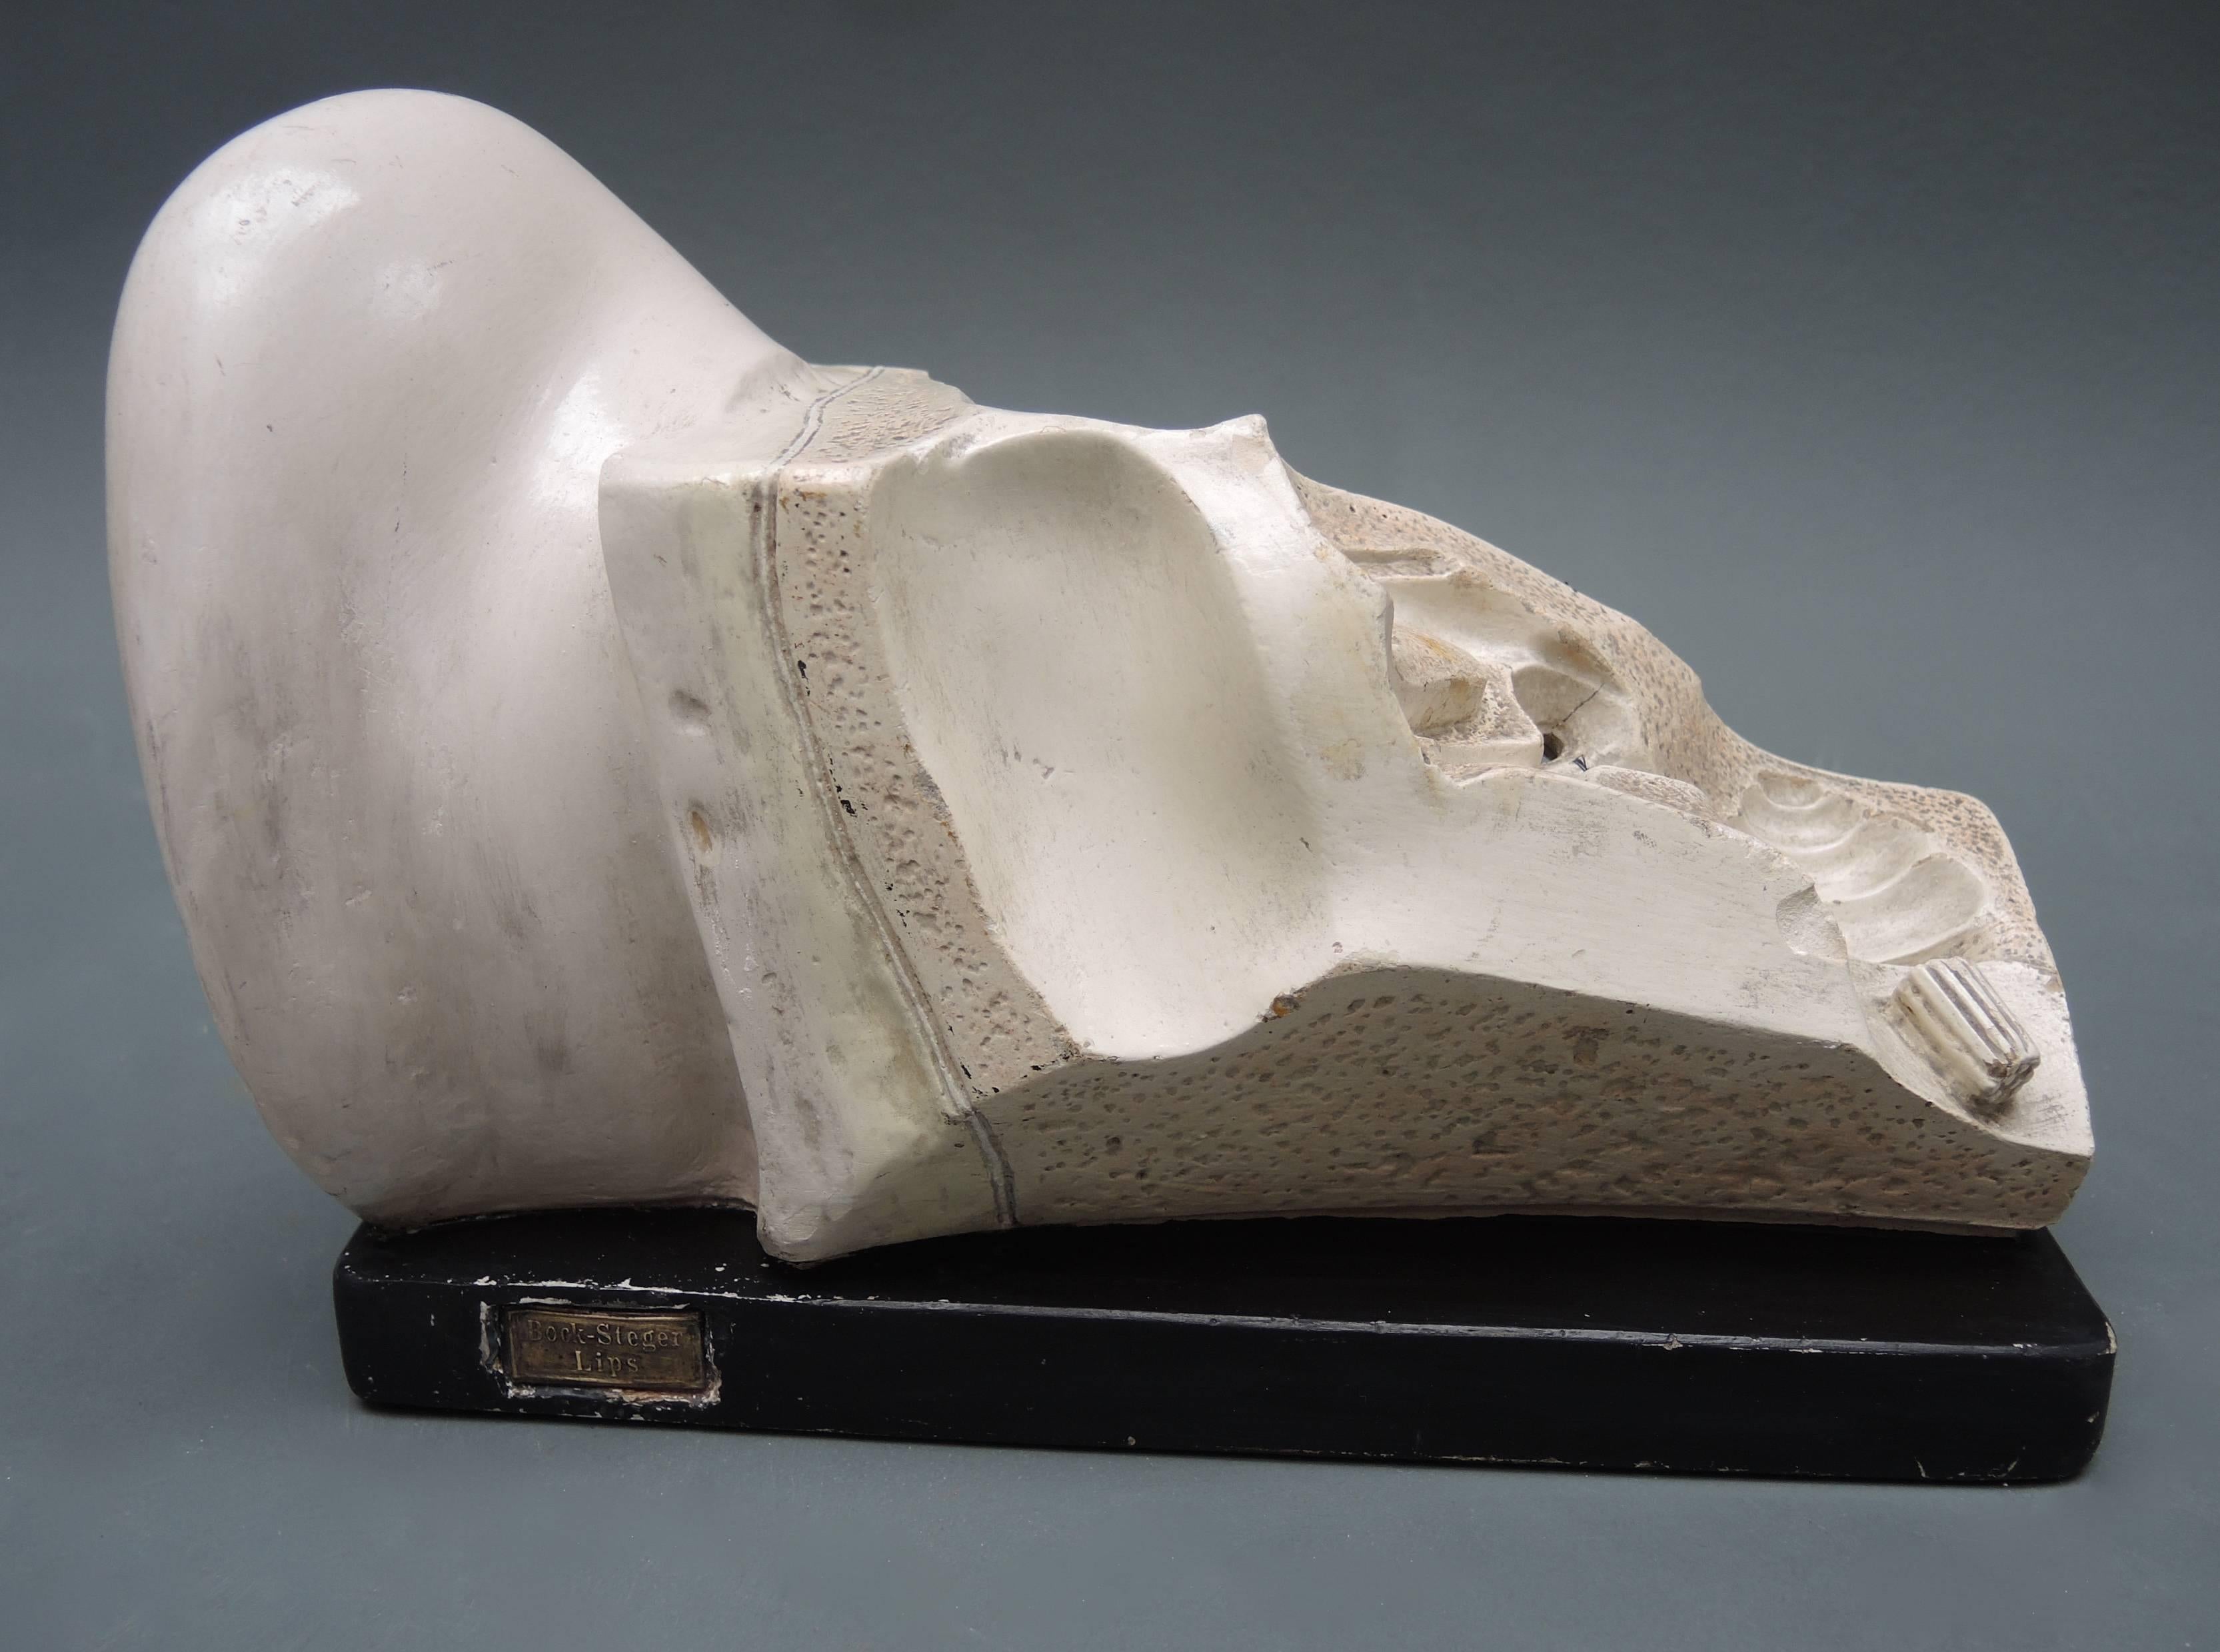 19th Century Didactic Anatomical Model of the Ear by Bock-Steger Lips For Sale 1